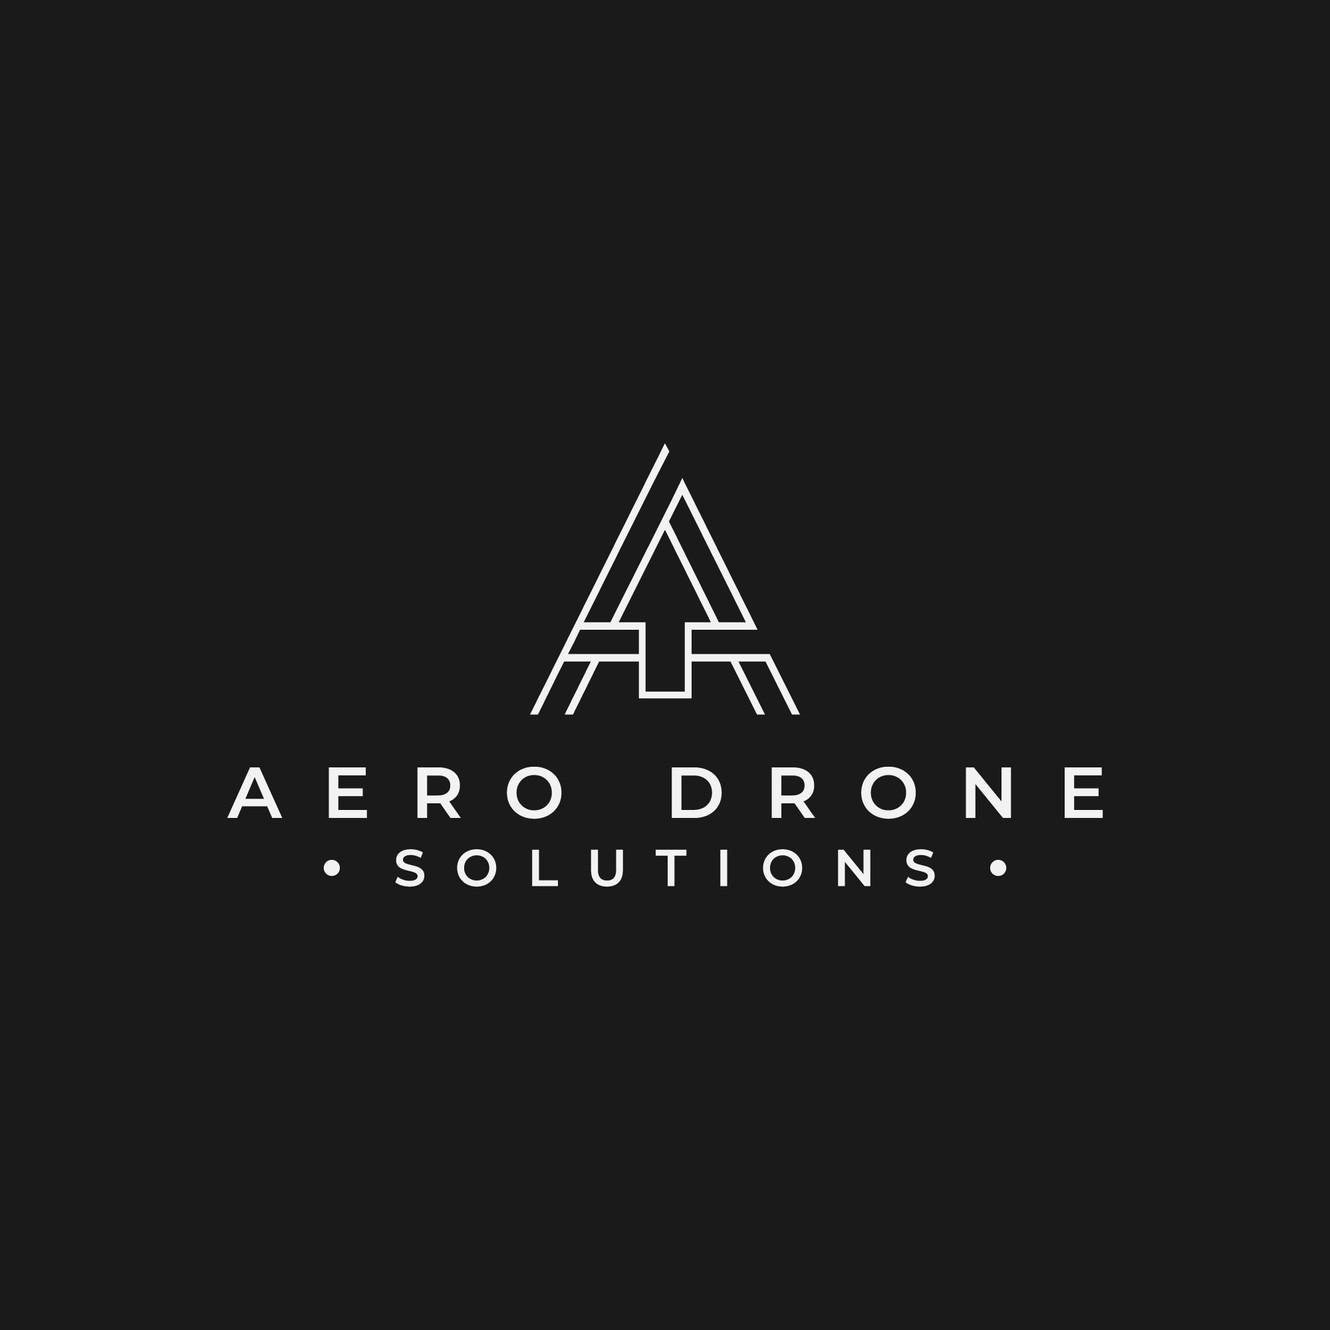 Product Services | Aero Drone Solutions LLC image